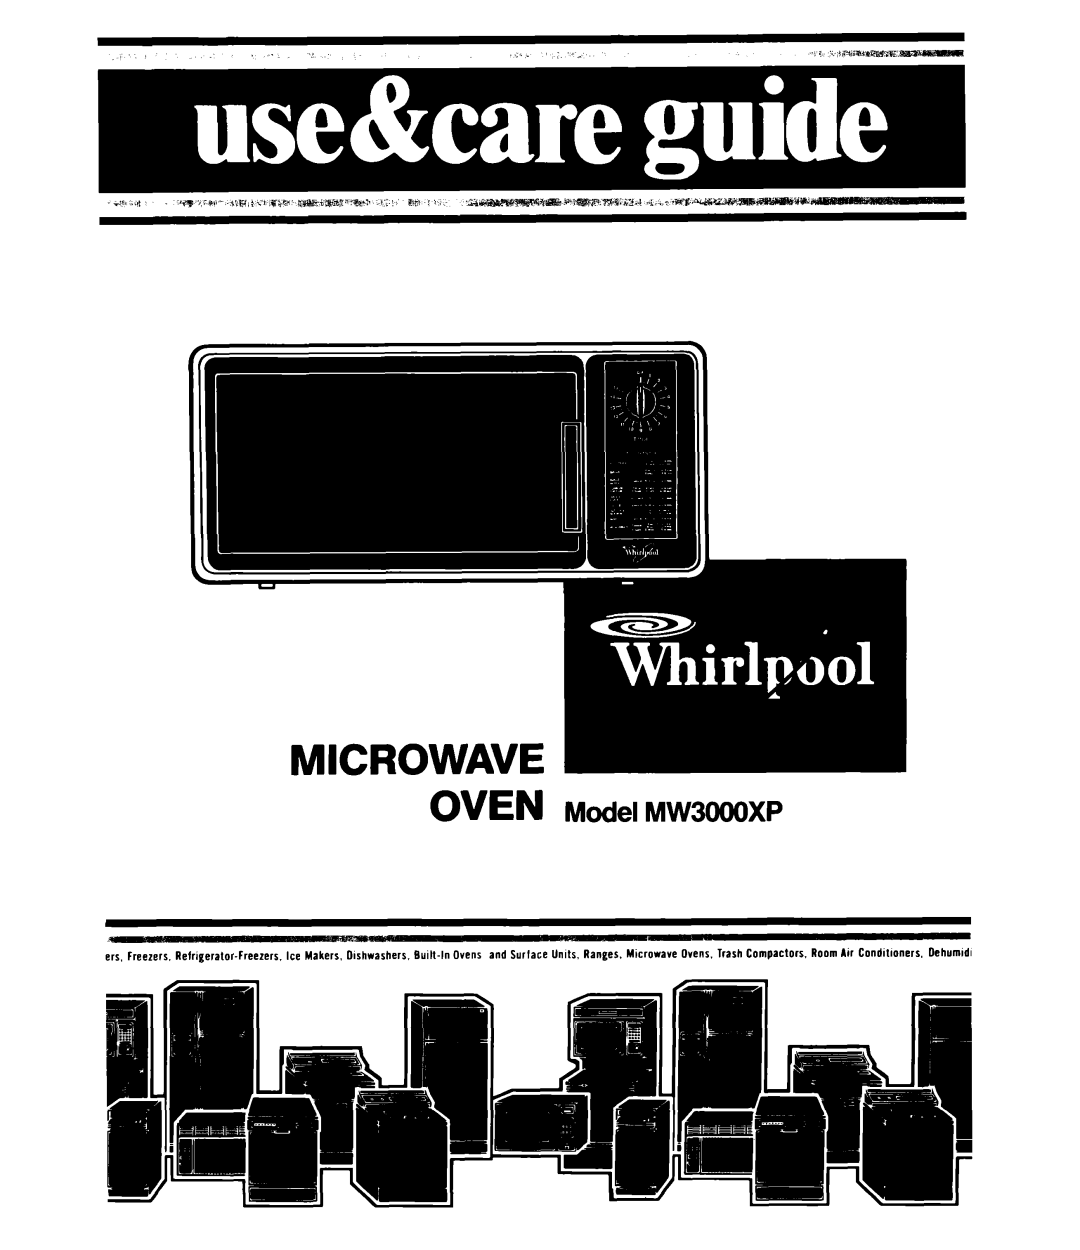 Whirlpool manual Microwave, OVEN Model MW3OOOXP 